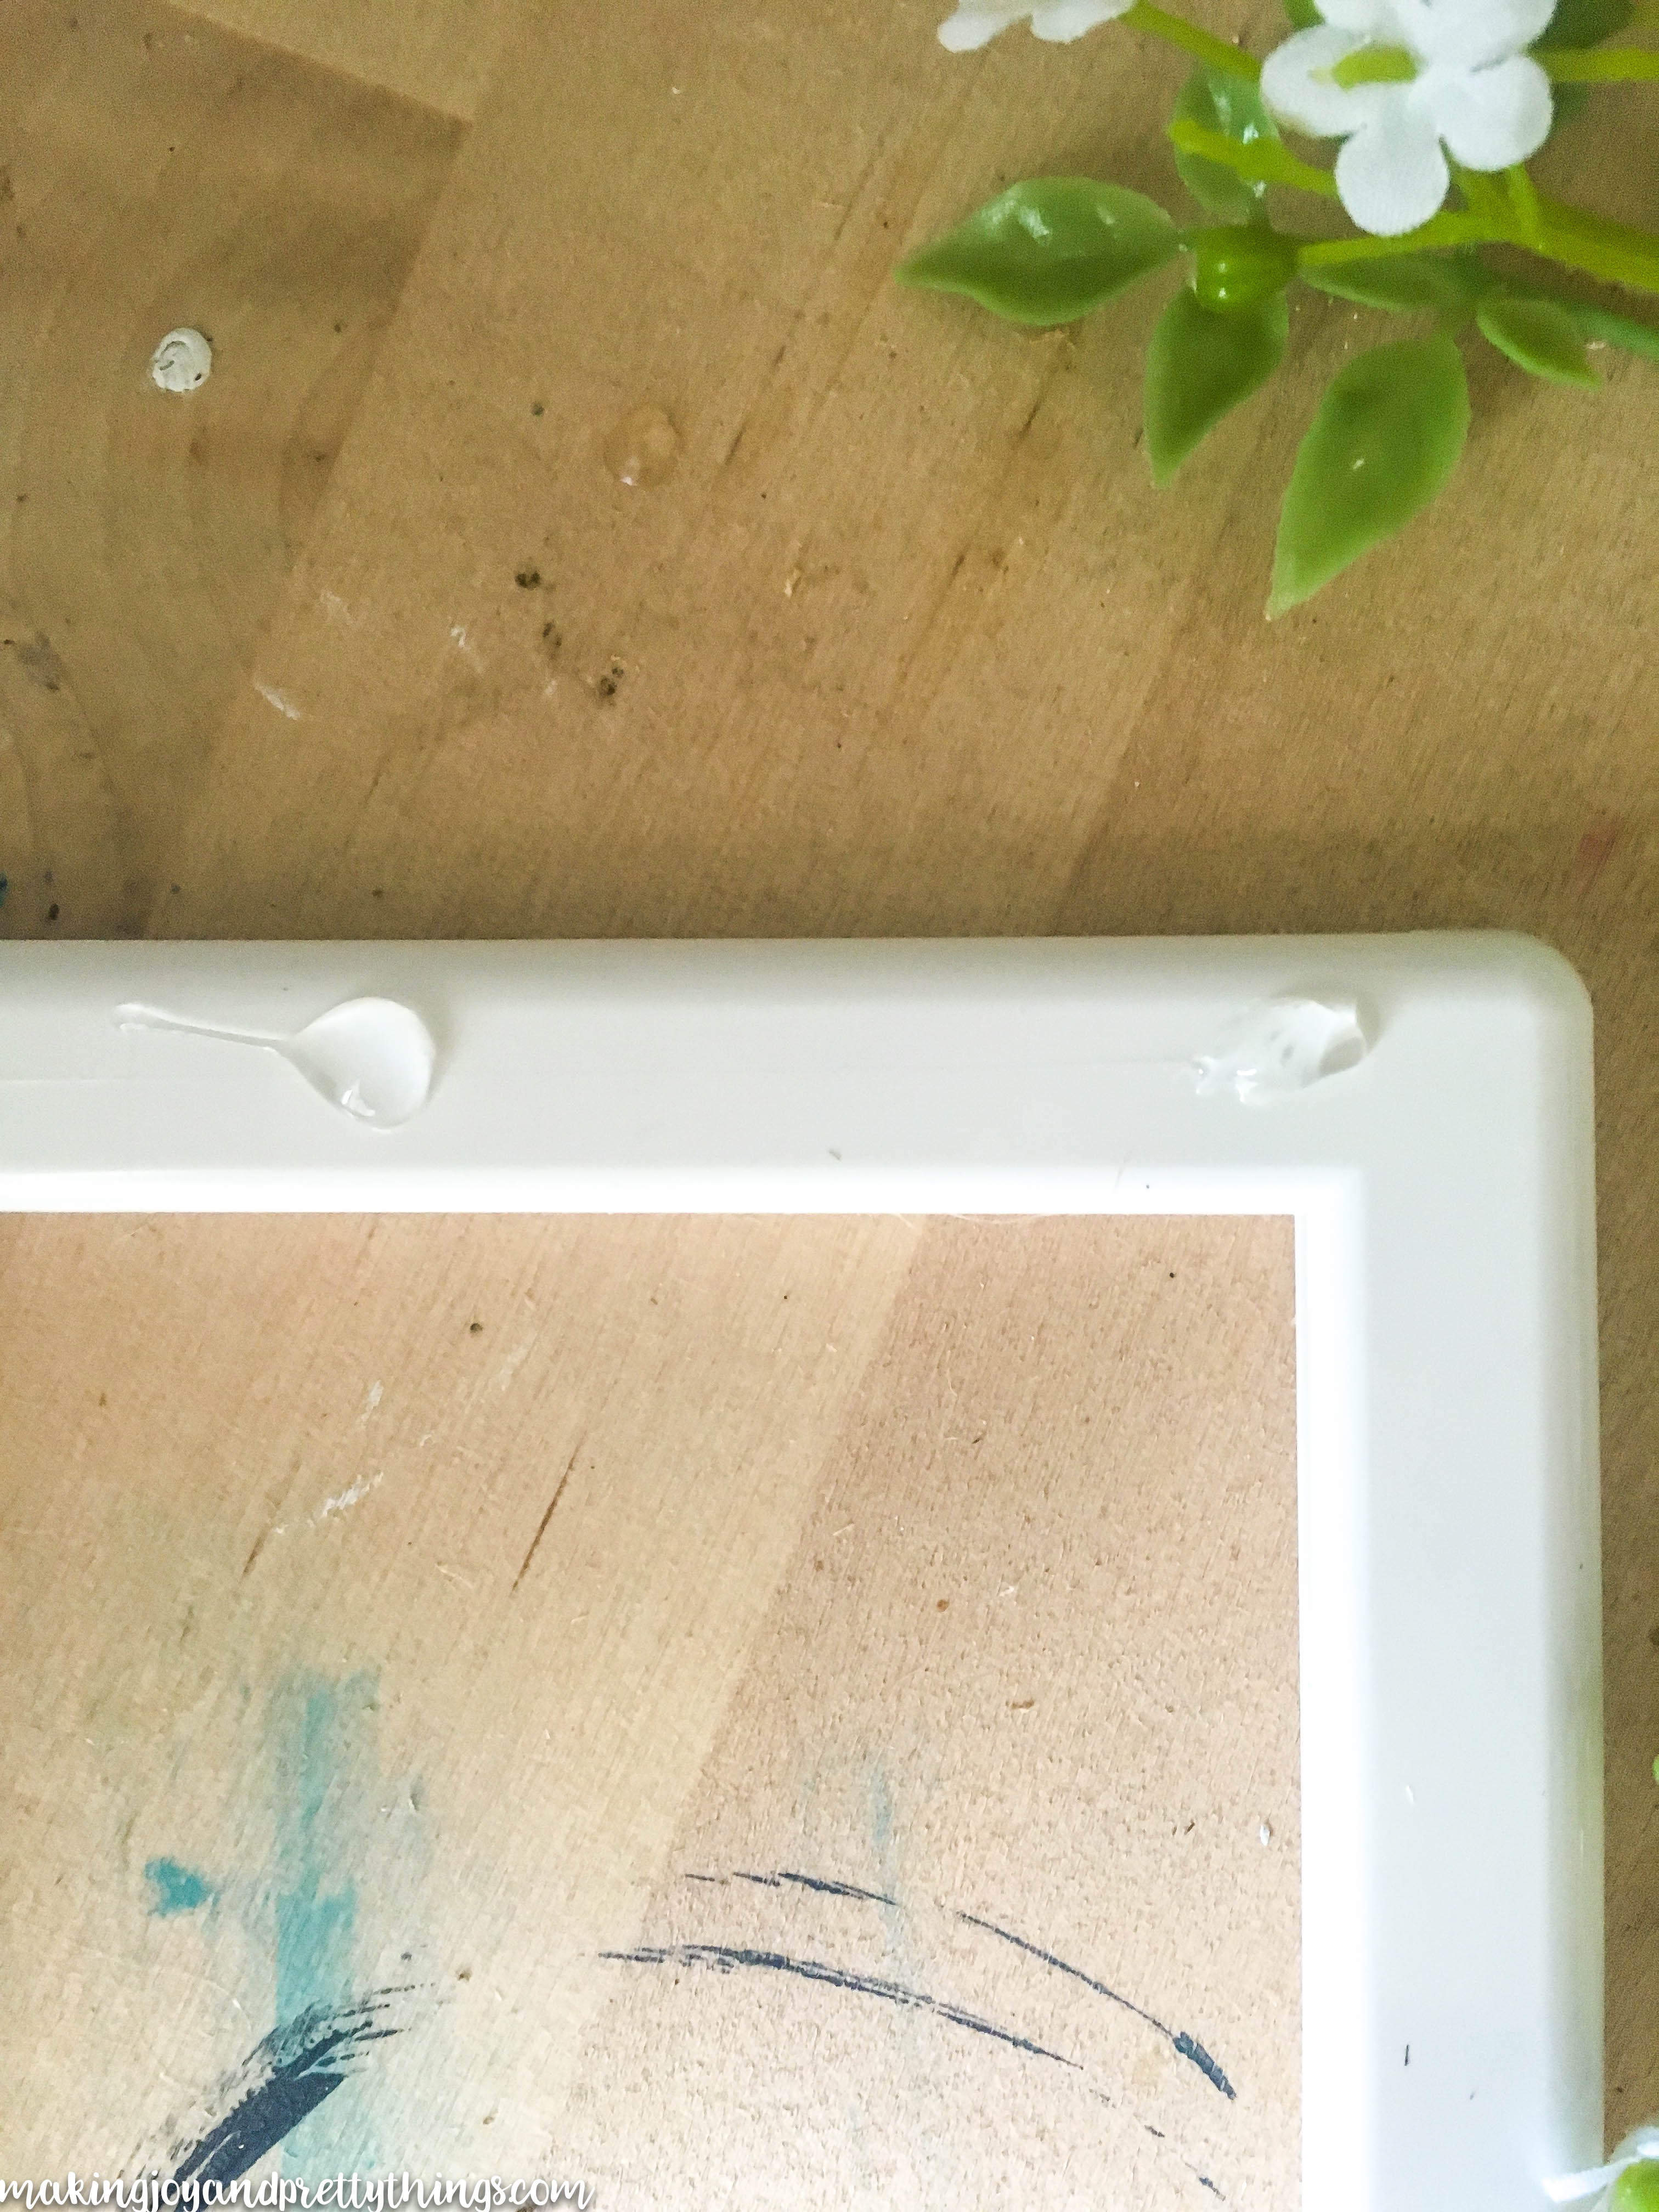 A close-up look at the corner of the white picture frame, with two dots of hot glue applied about an inch apart from each other.